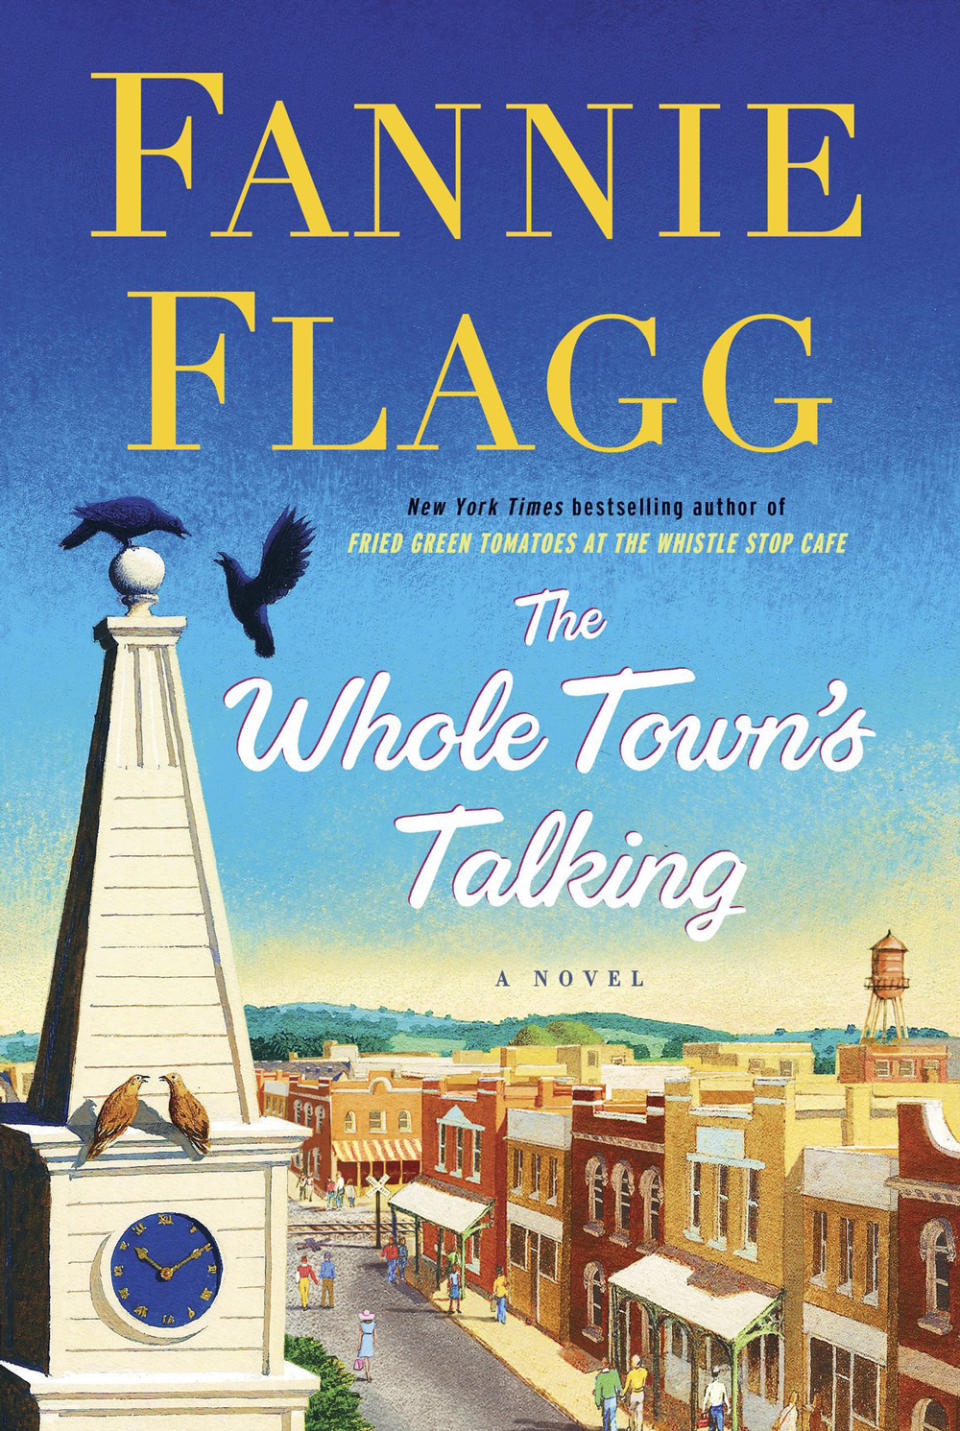 The Whole Town's Talking  by Fannie Flagg